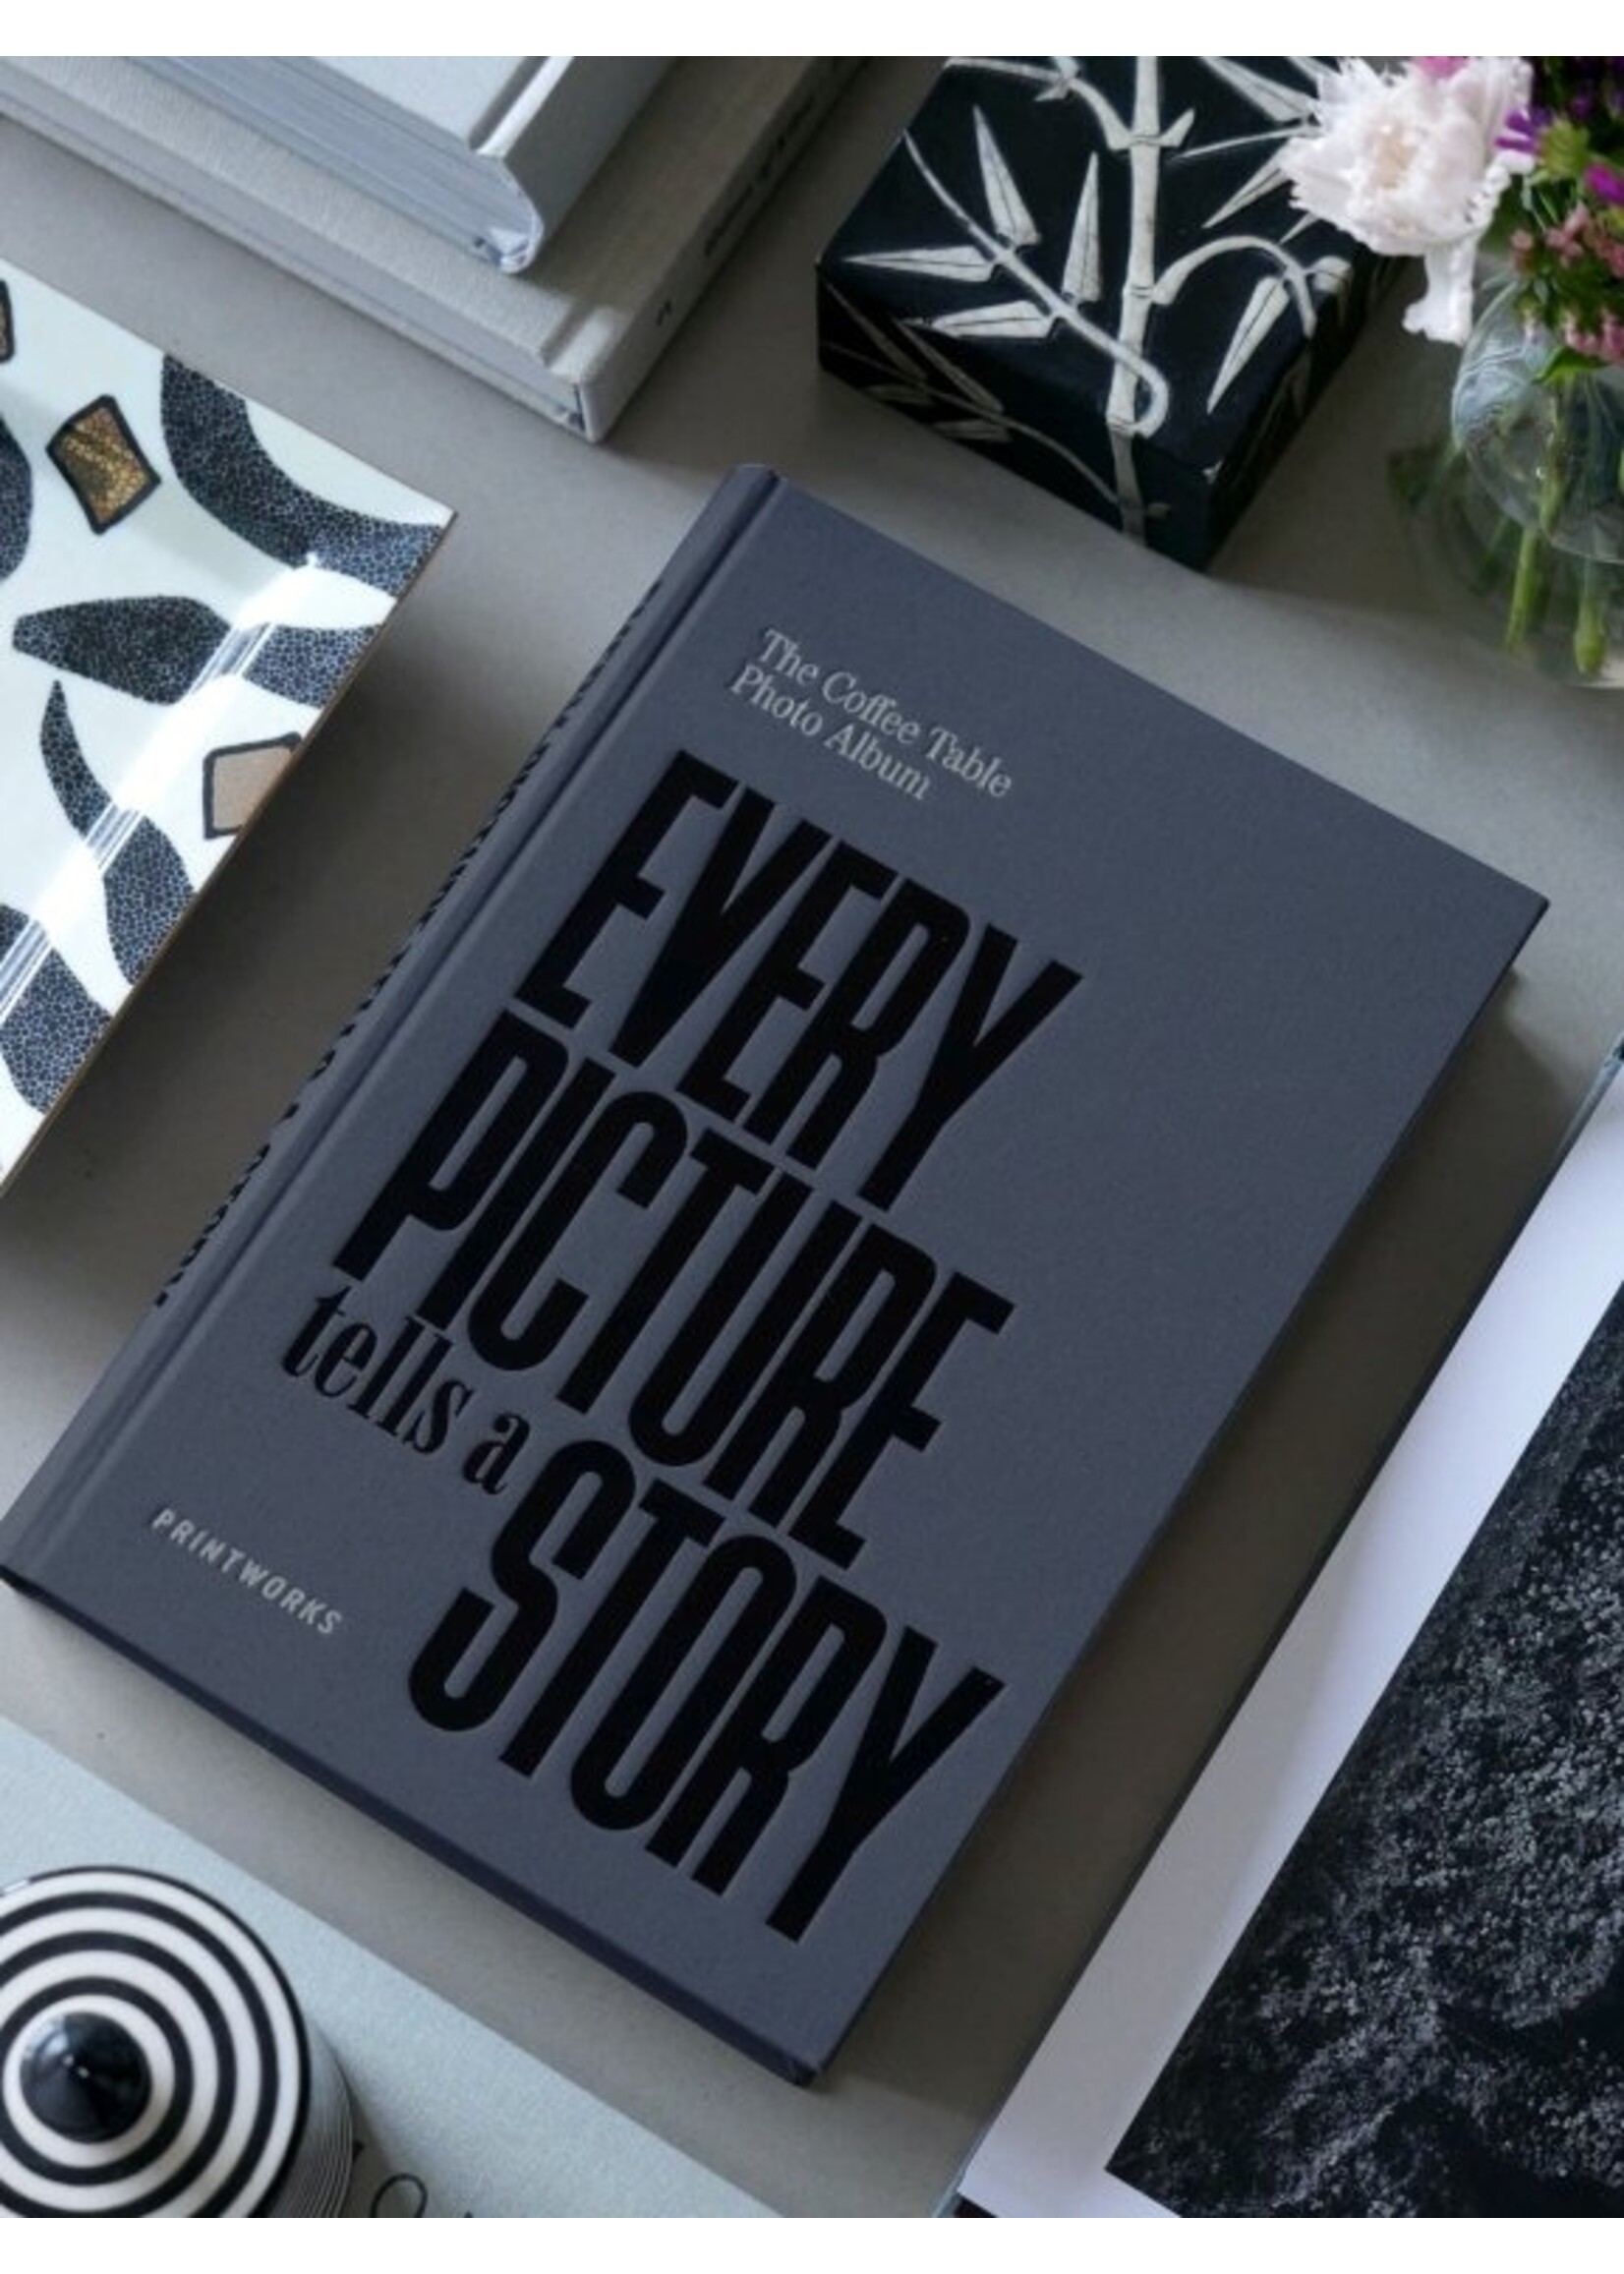 Bodini Printworks Photo Book - Every Picture Tells a Story